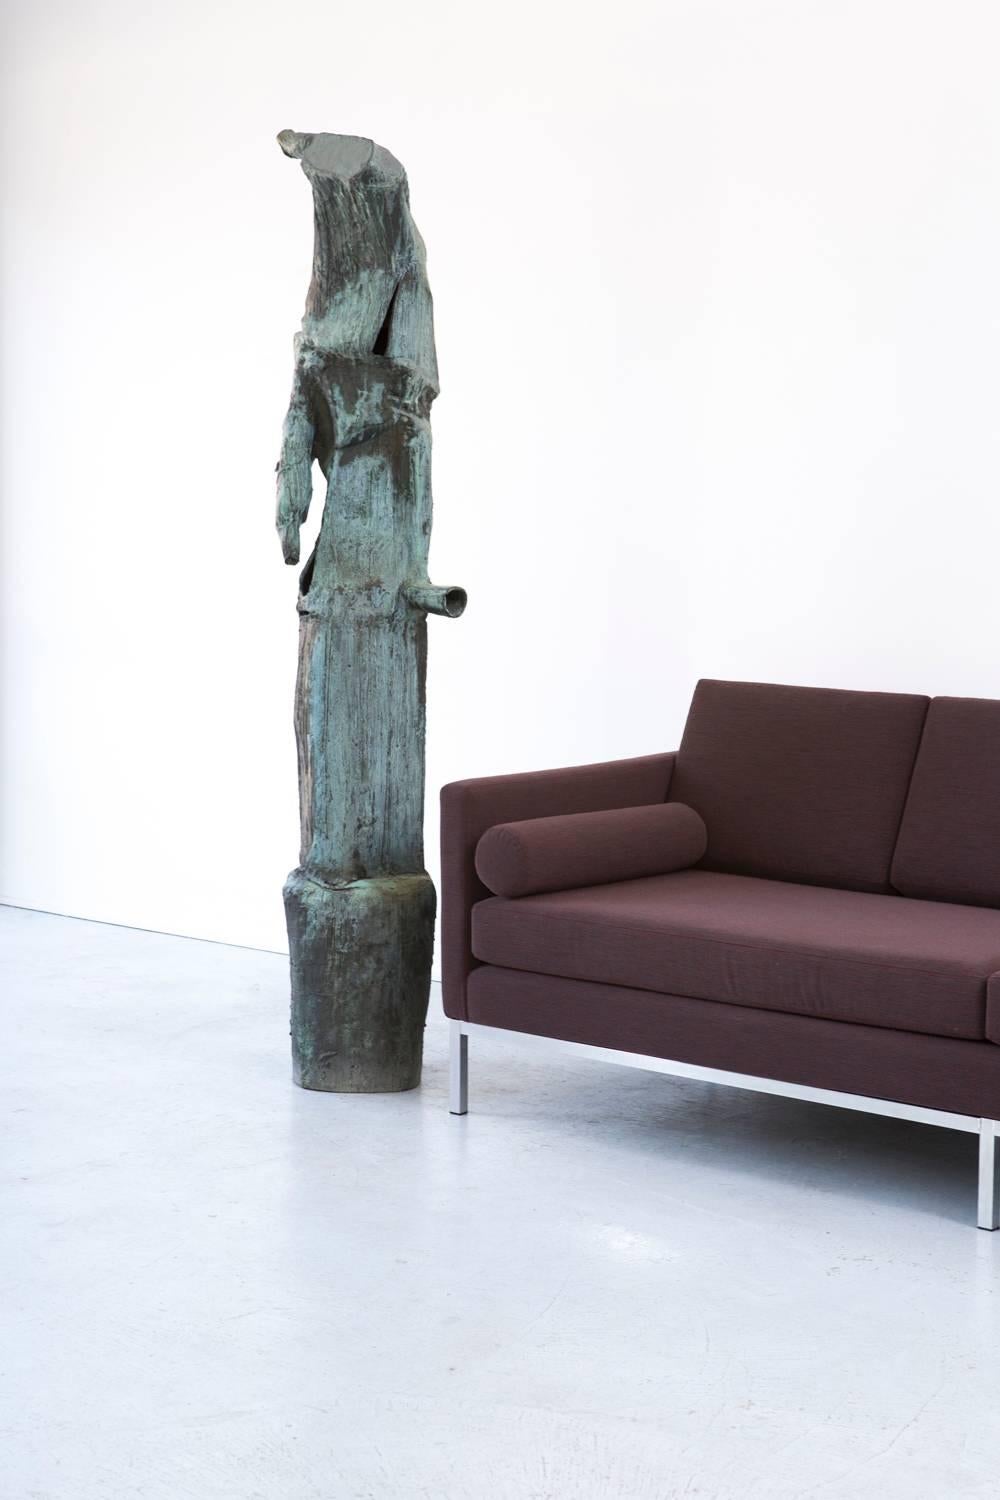 1960's Monumental Brutalist Stan Mock Sculpture Standing 6 Feet Tall  In Excellent Condition For Sale In Chicago, IL